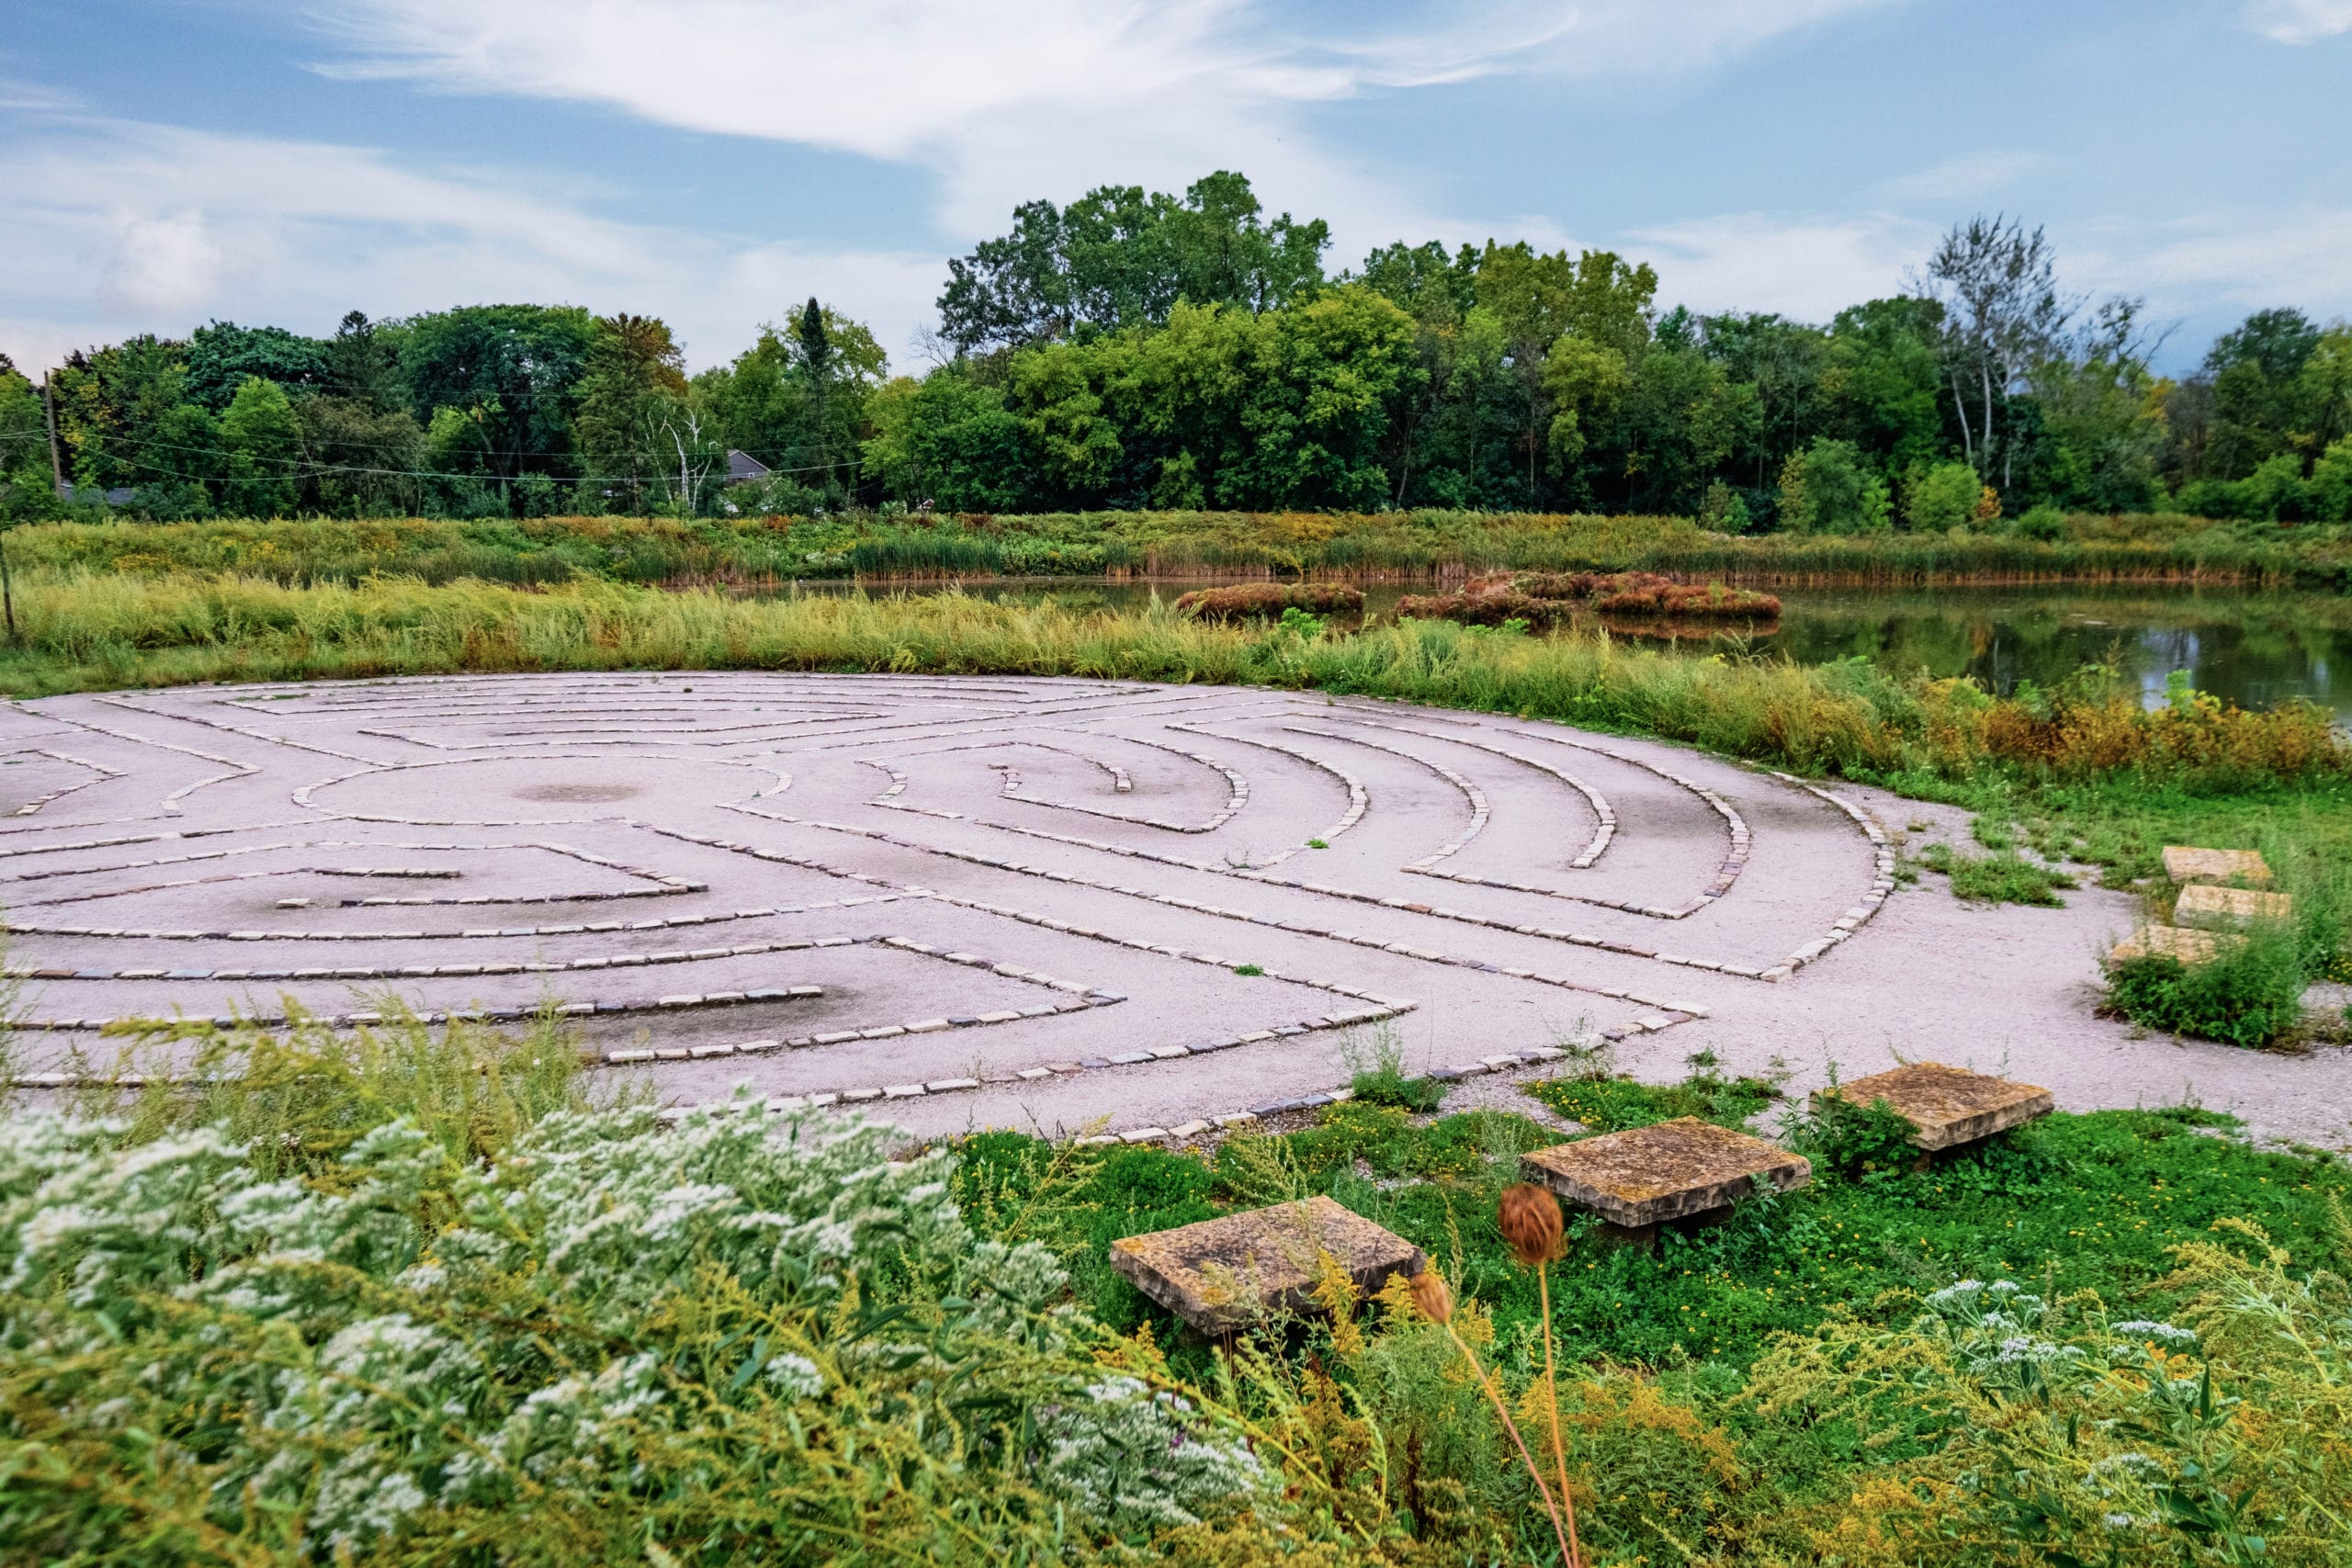 Hartung Park Labyrinth in Wauwatosa